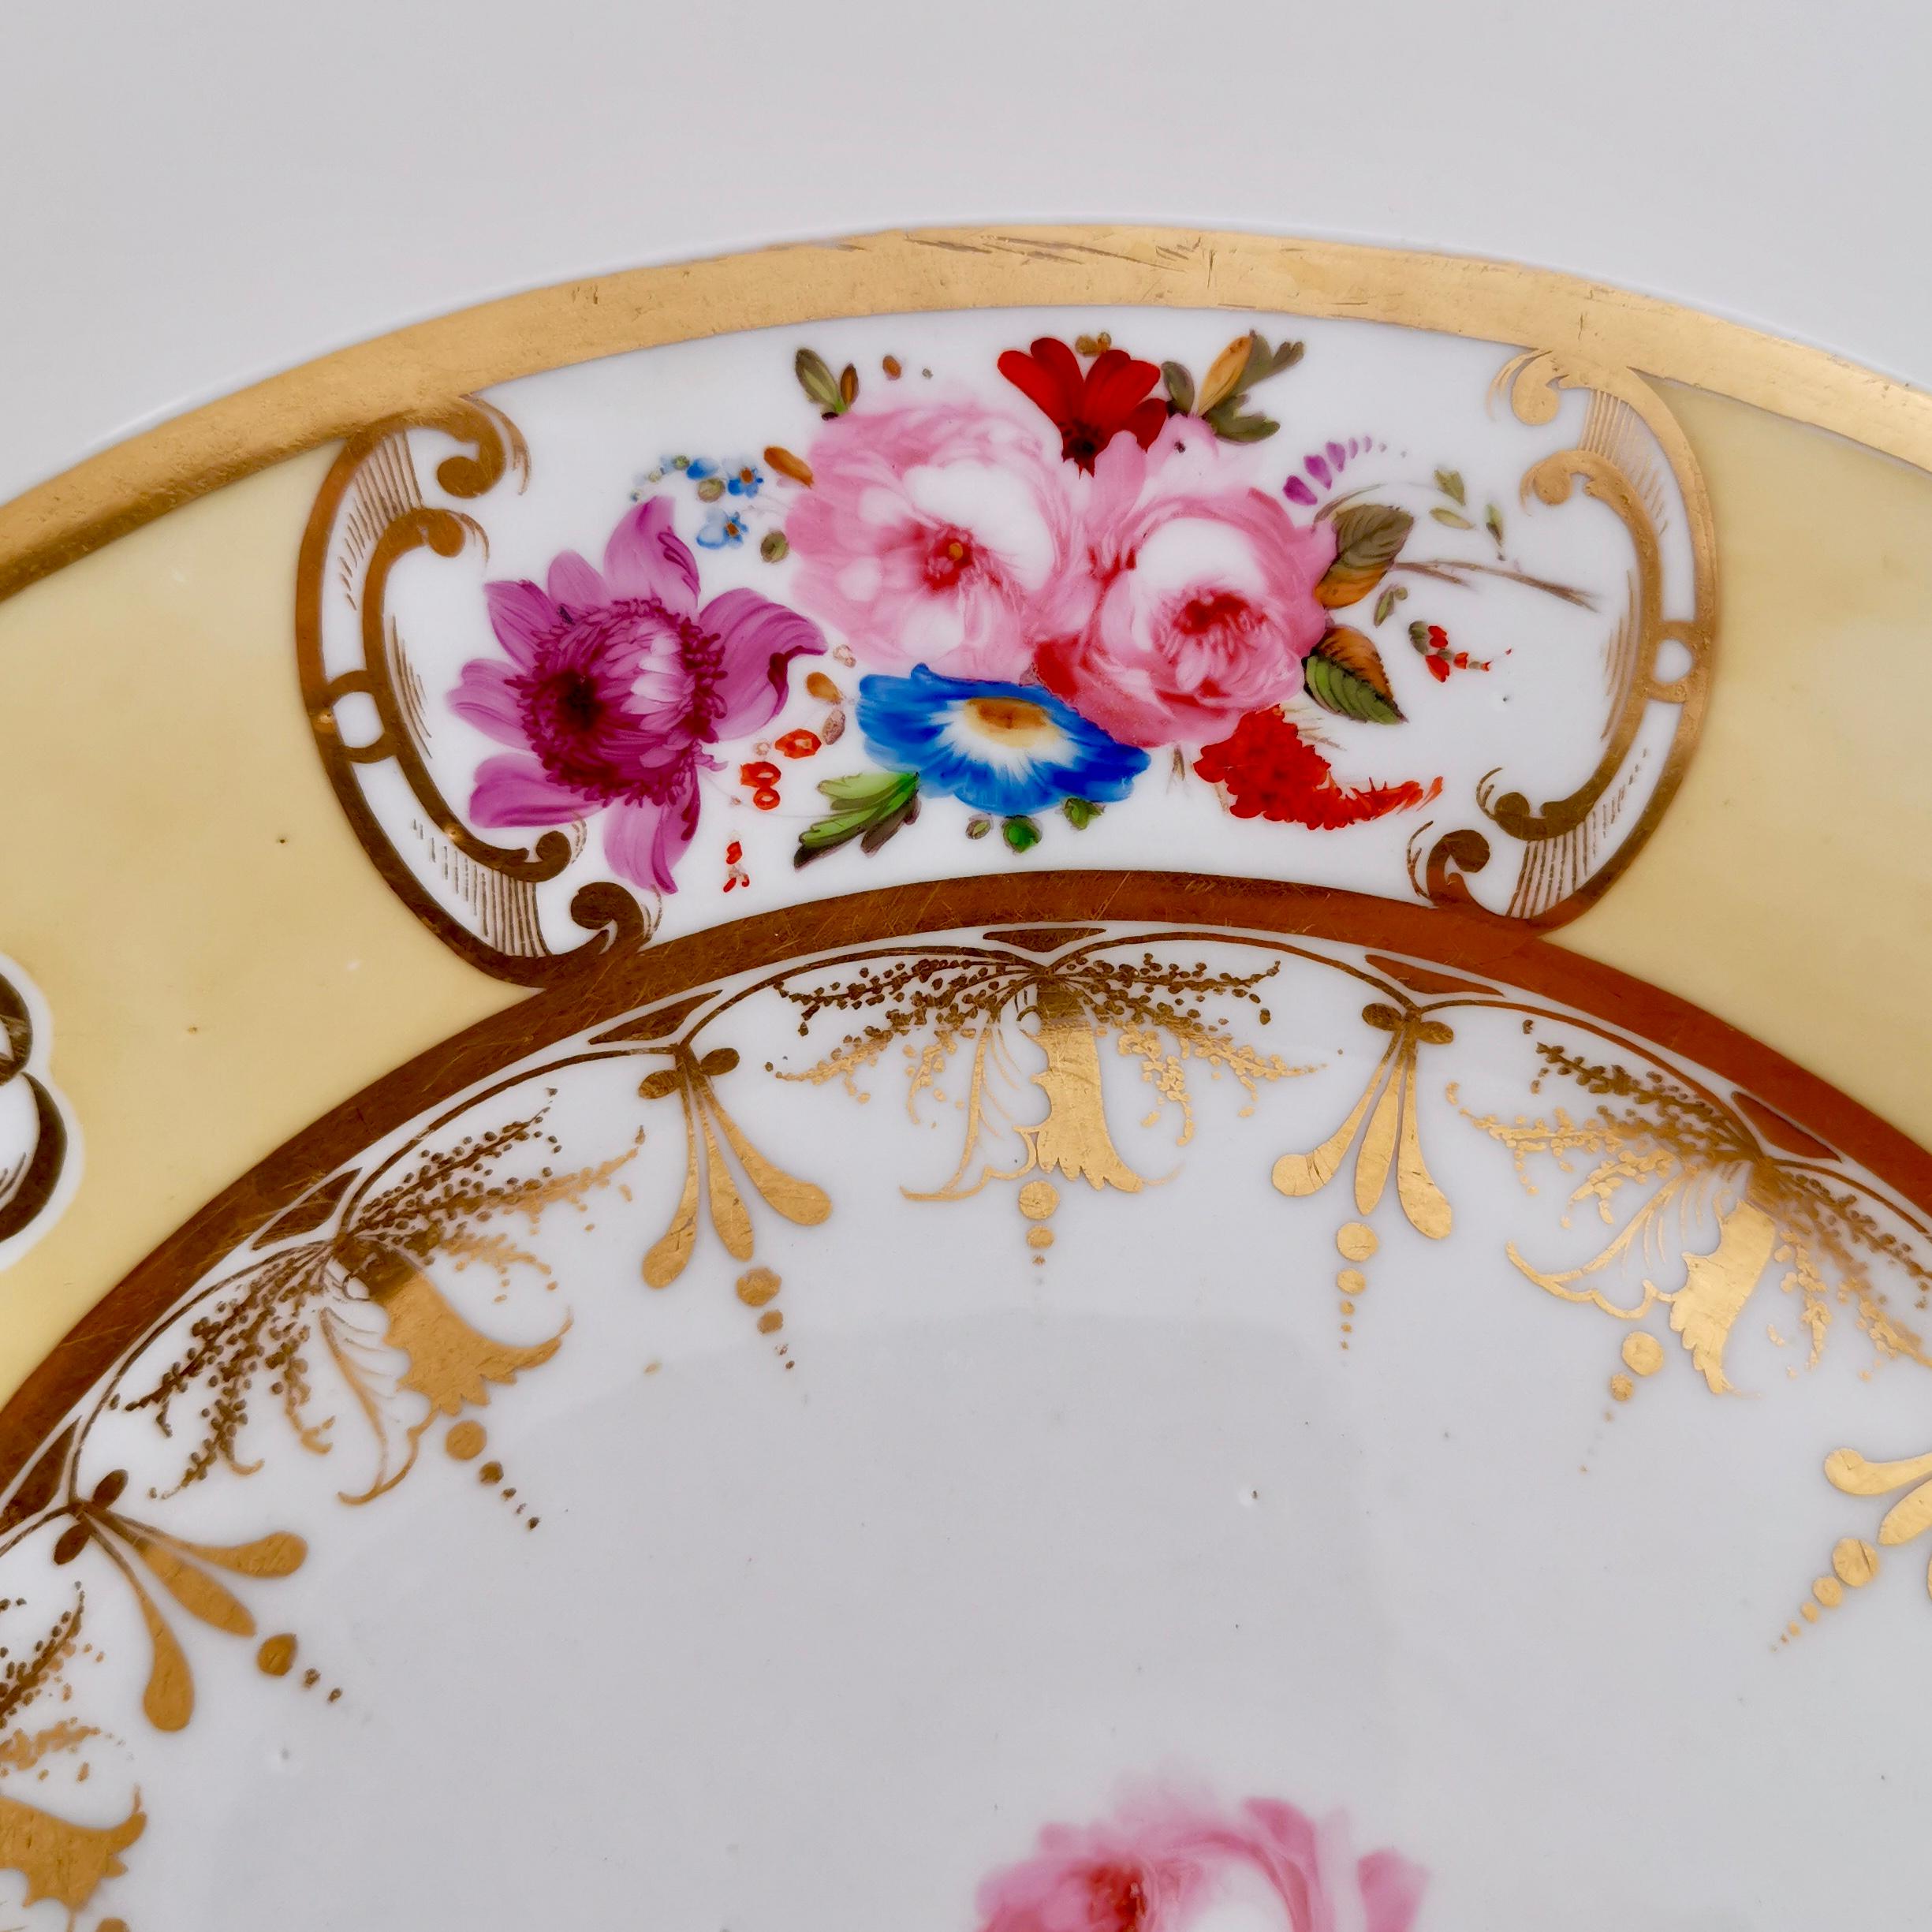 Regency Coalport Plate, Yellow Ground with Hand Painted Flowers, circa 1820